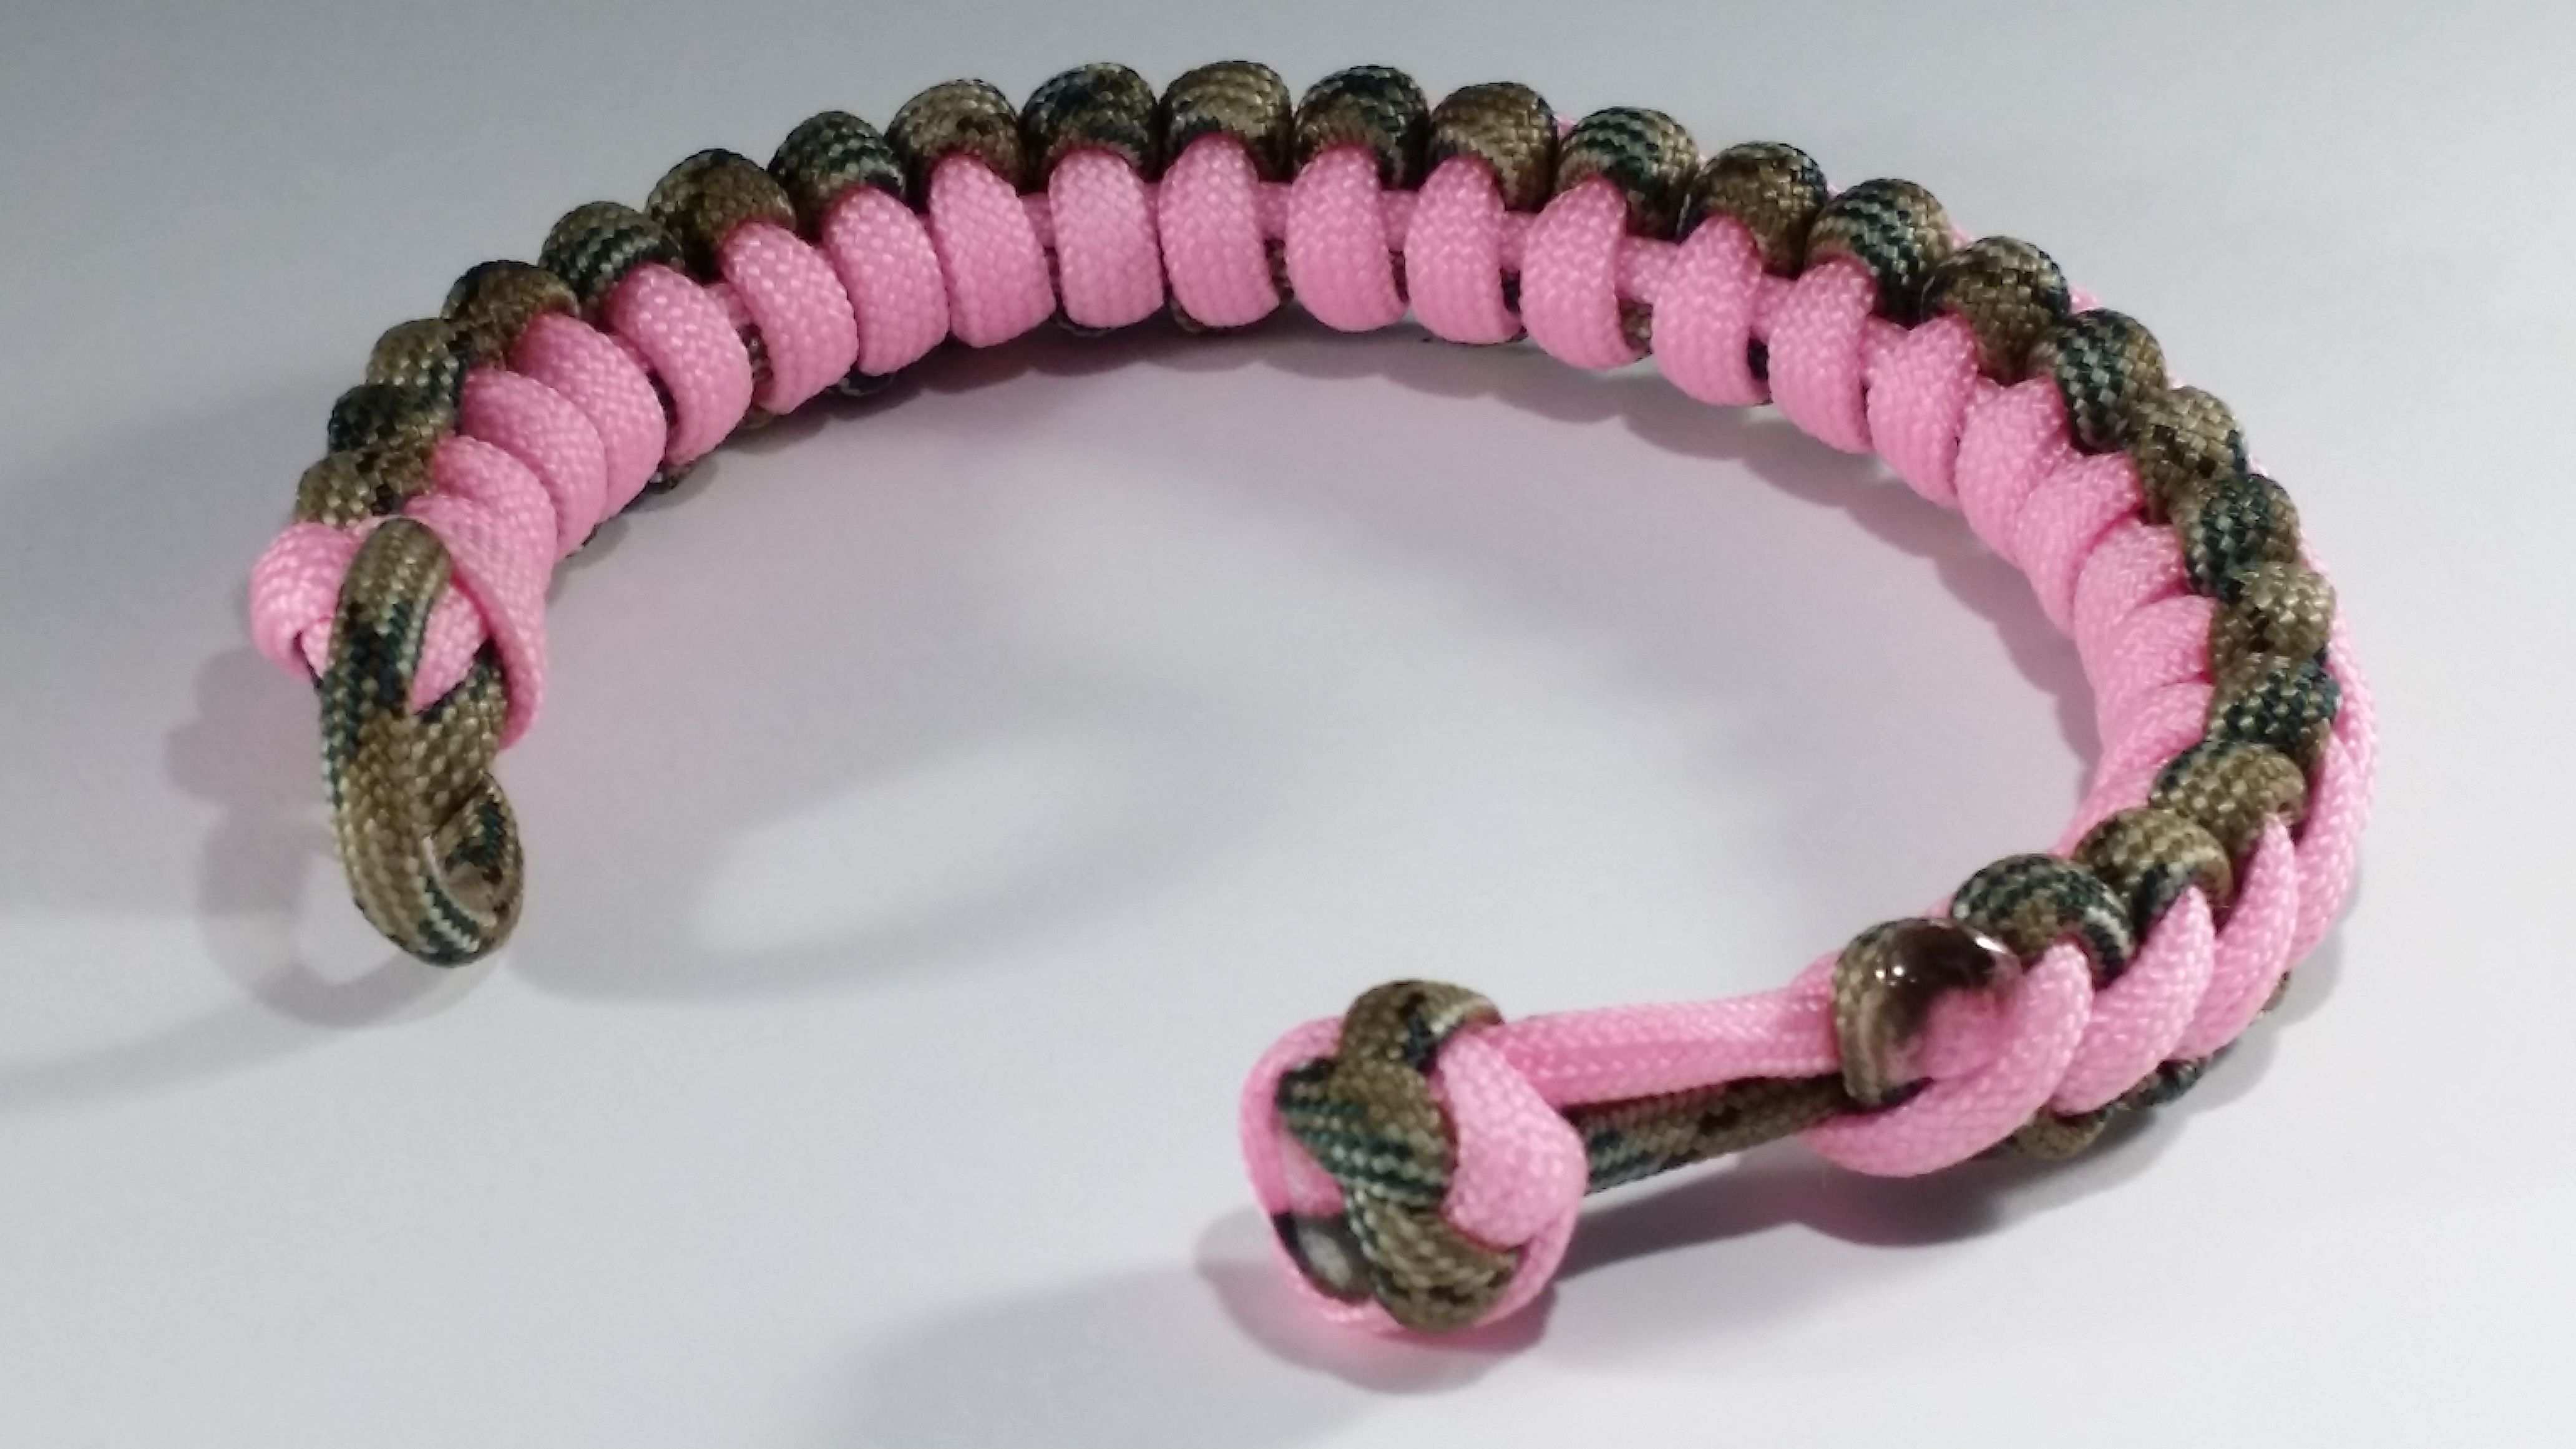 Paracord Armband Paracord 550 Typ Iii Muster Curling Millipede Rosa Tarnfarben Eigene Herstellung Paracord Bracelet Paracord 550 Type Iii Pattern C